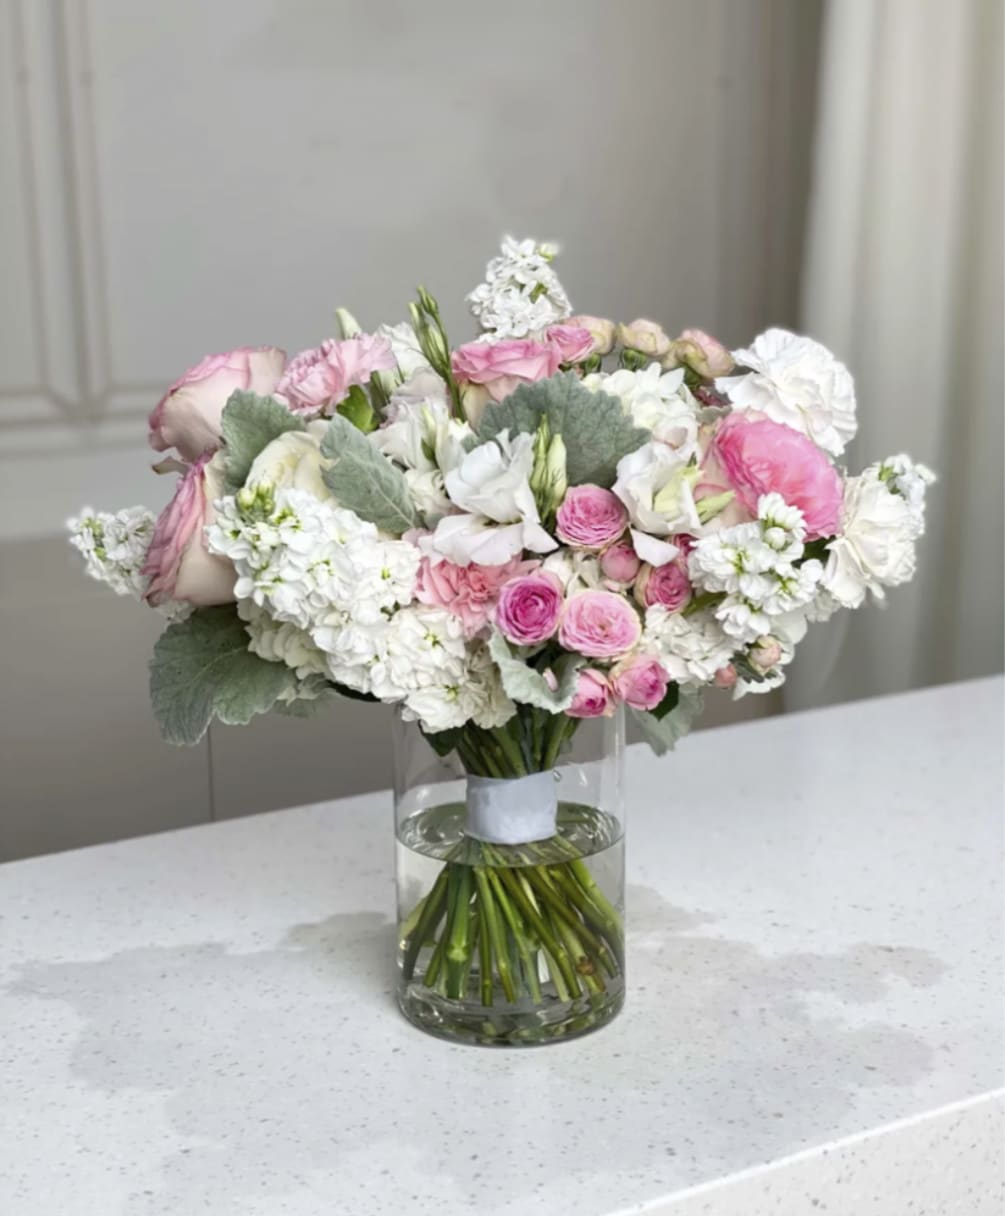 An elegant bouquet with pink roses, white matthiolas  and other flowers